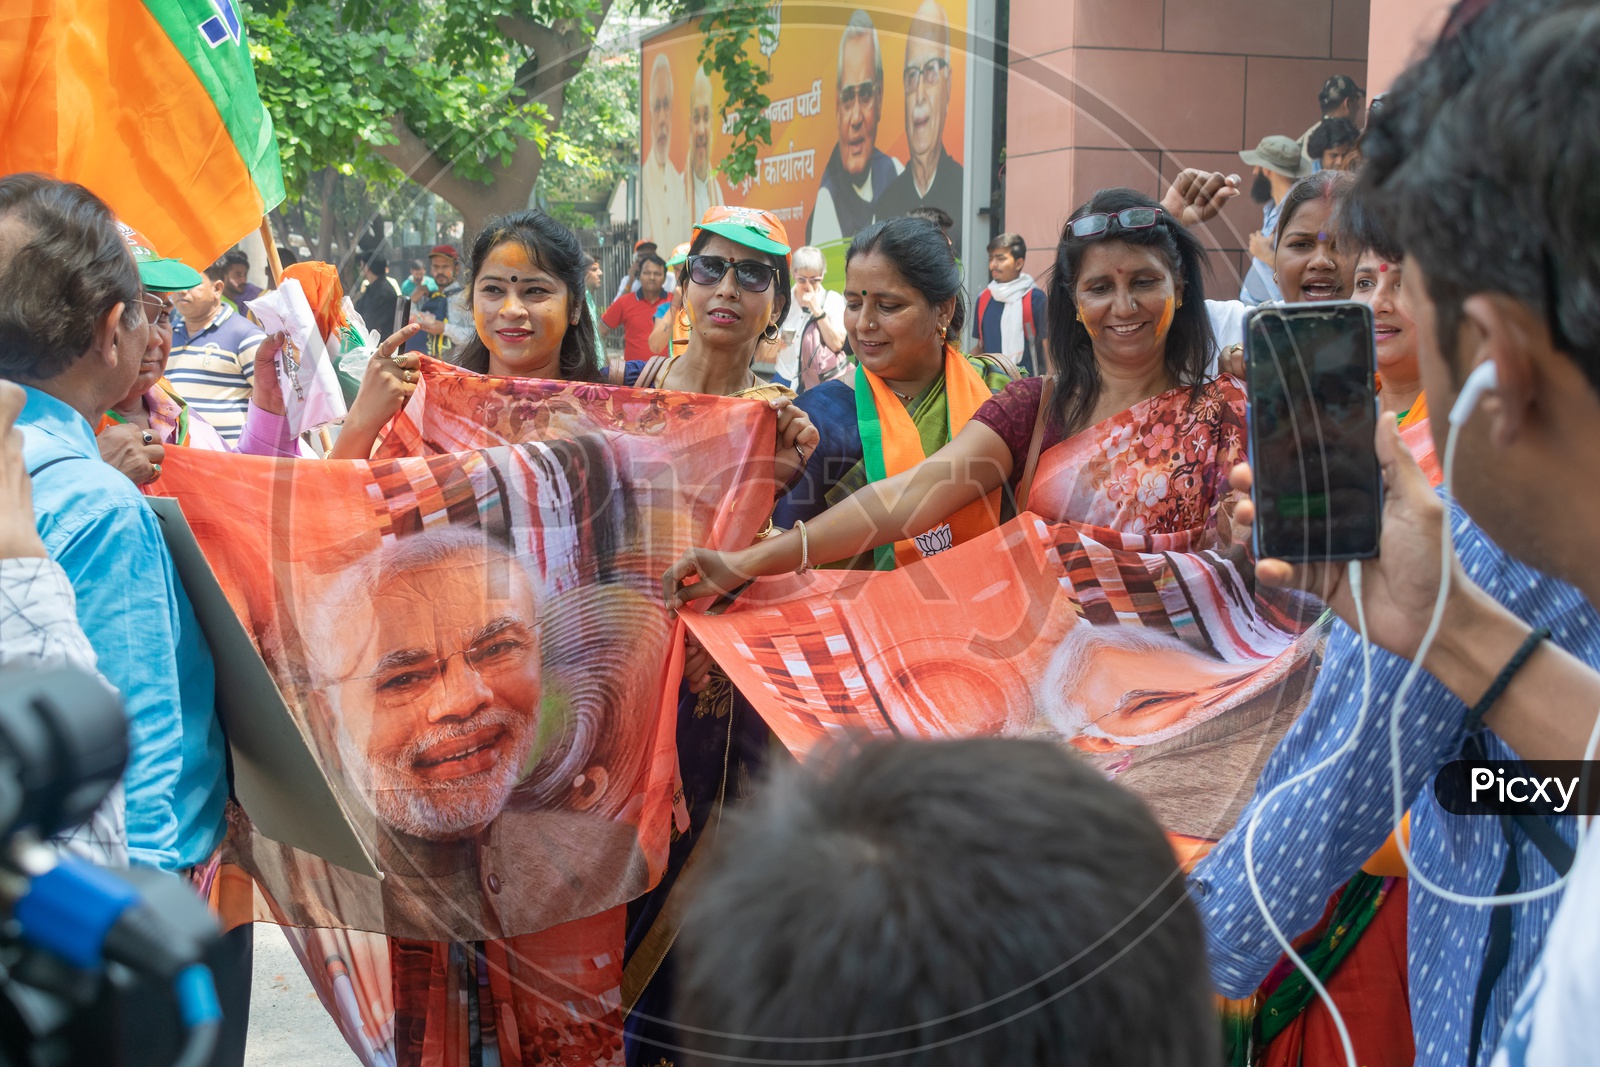 Women wearing sarees that have a picture of Narendra Modi printed on it.